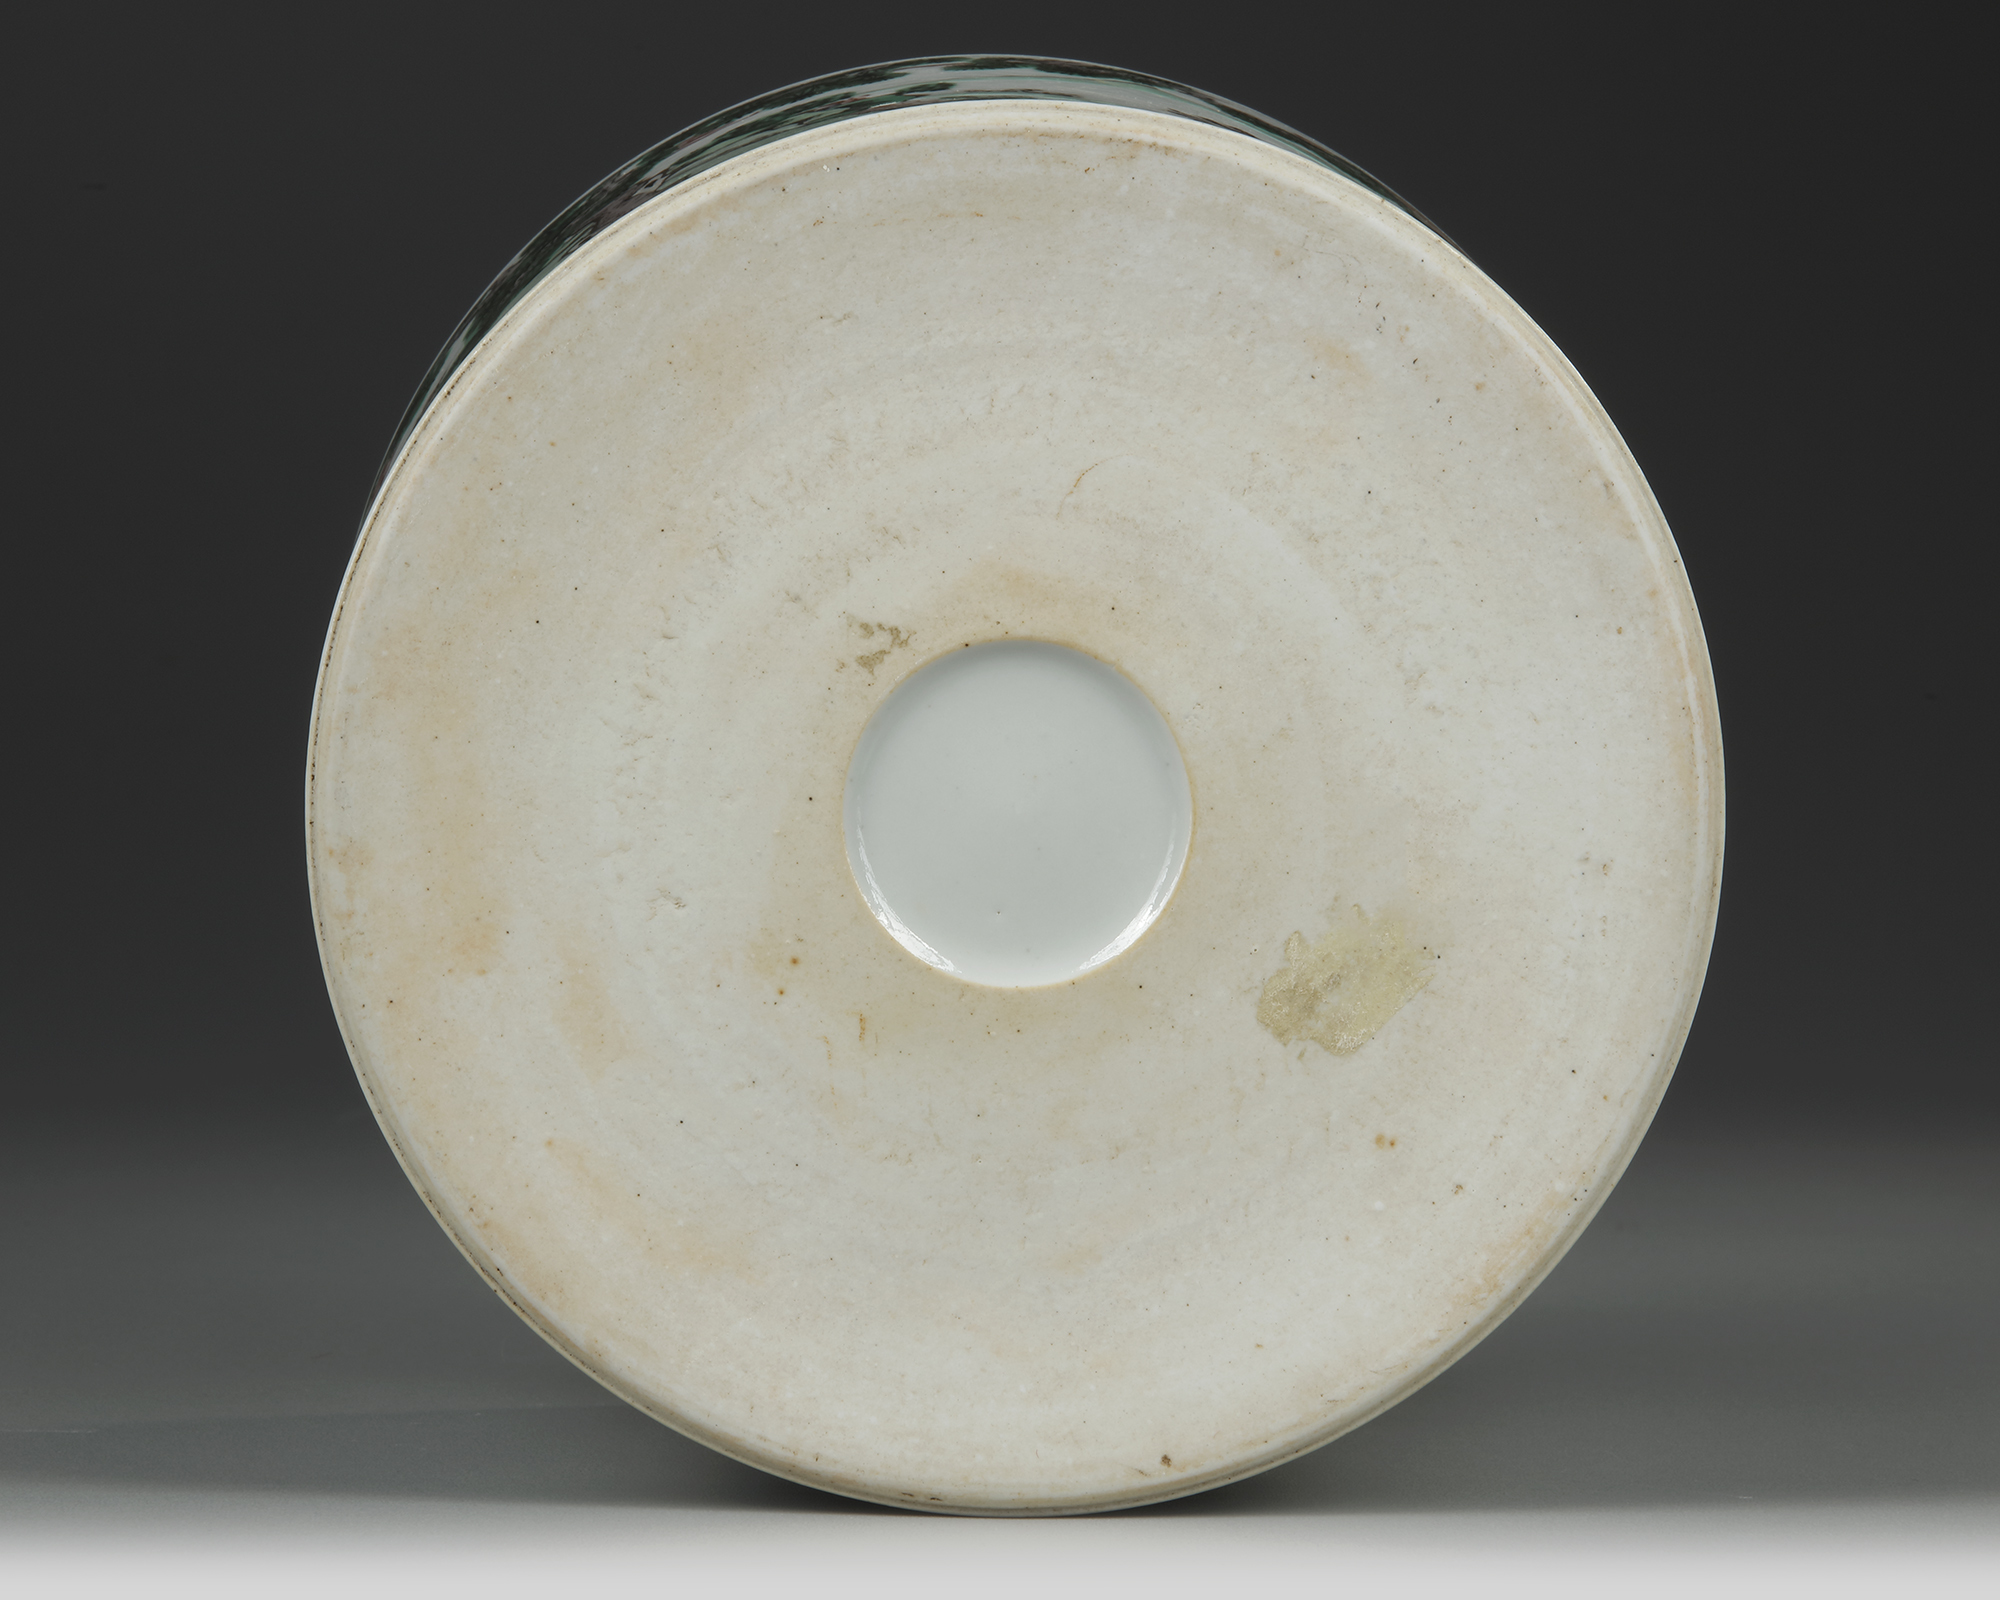 A CHINESE FAMILLE VERTE BRUSH POT, QING DYNASTY (1644-1911) - Image 7 of 7